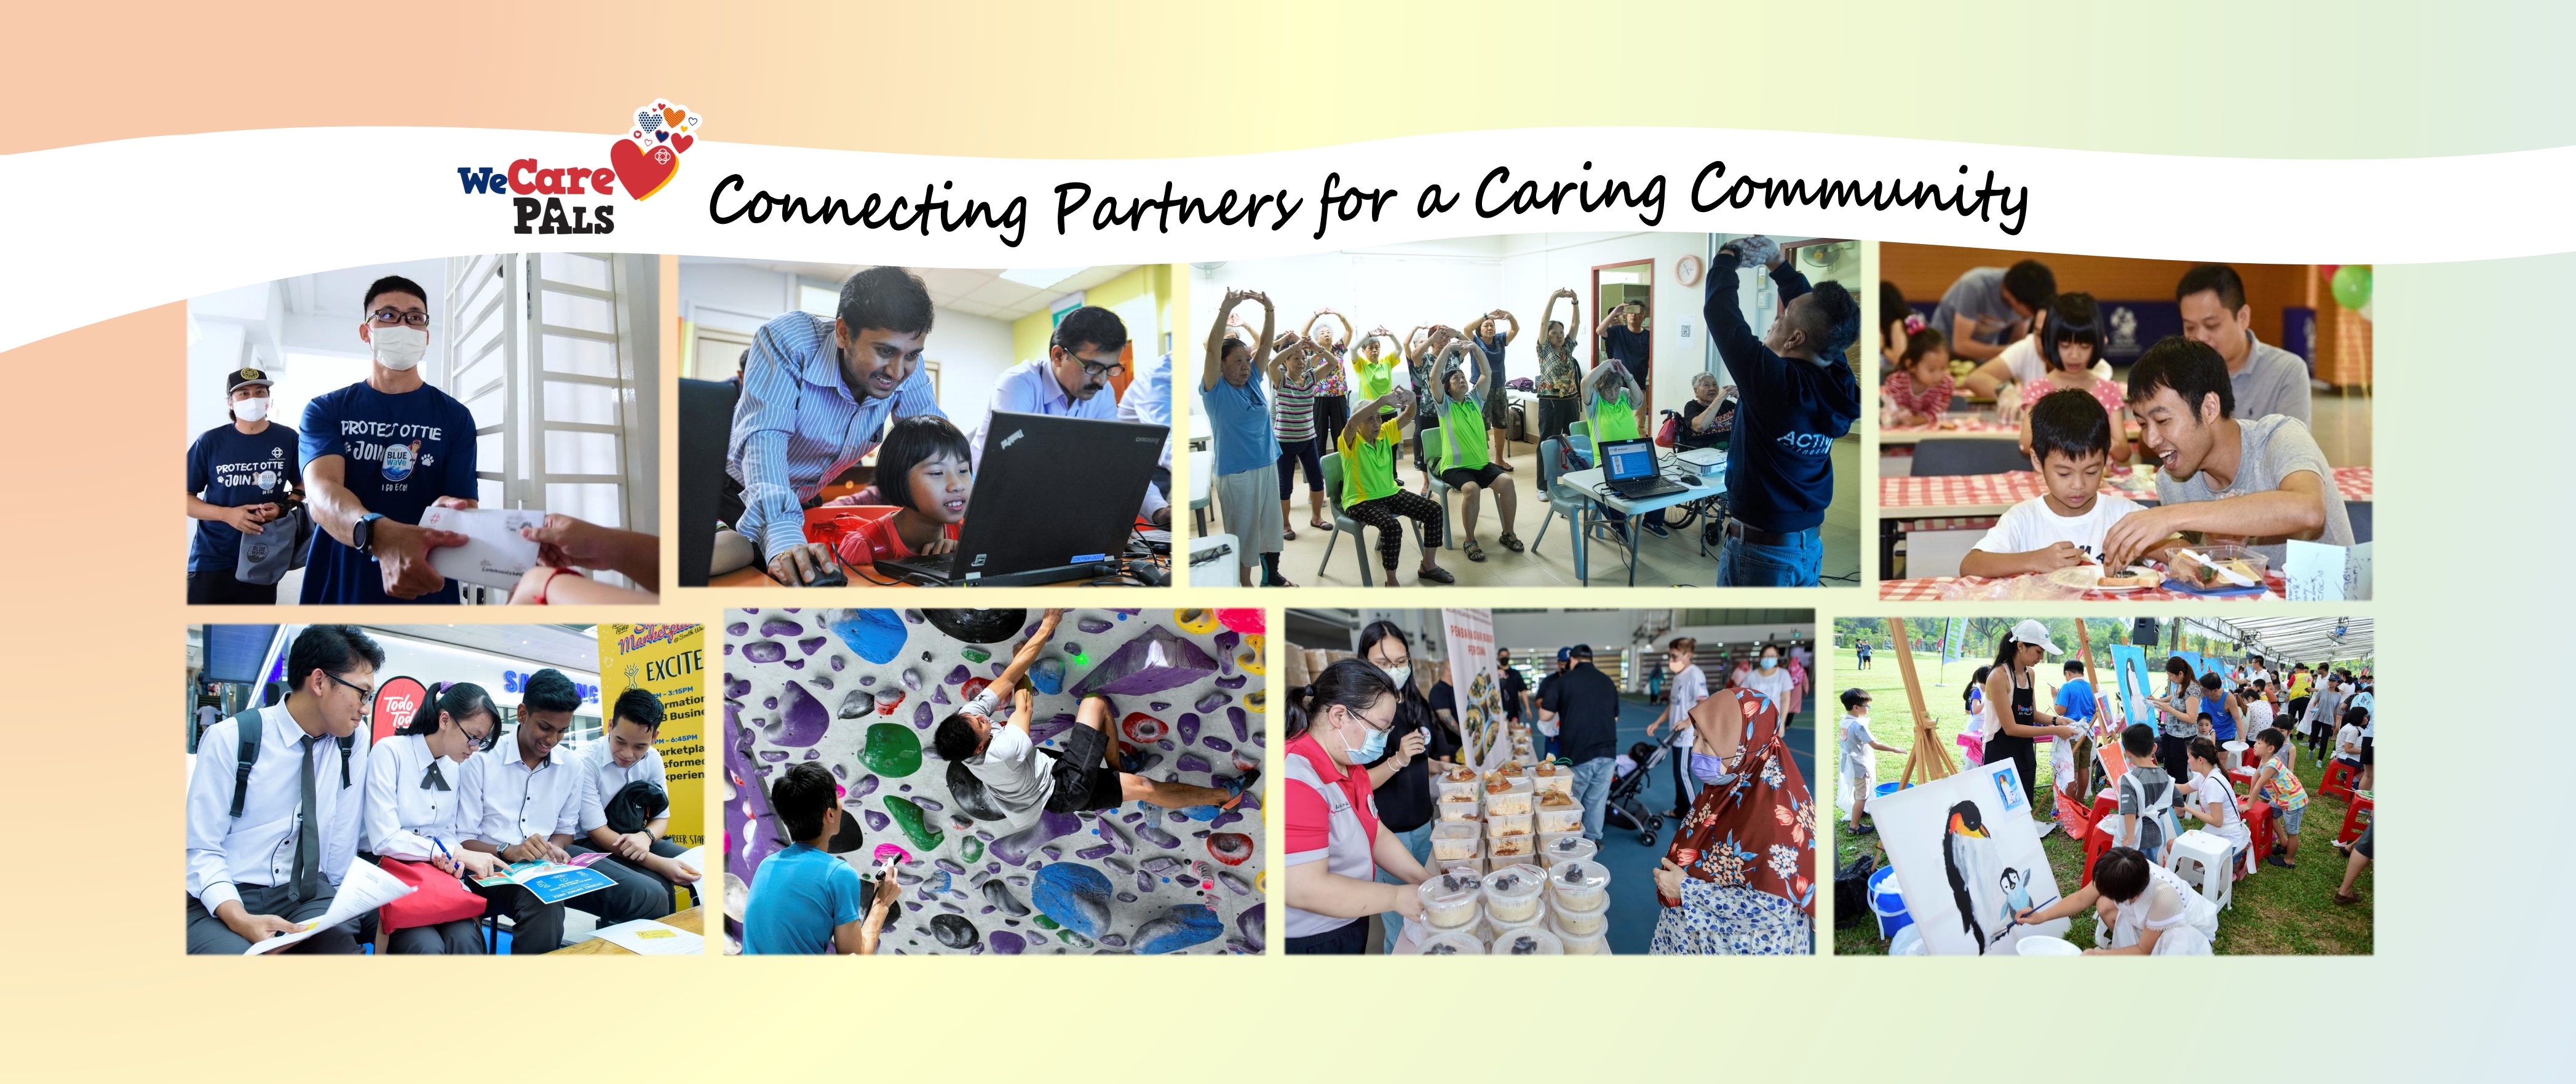 Collage of People's Association's Community Events and Partners